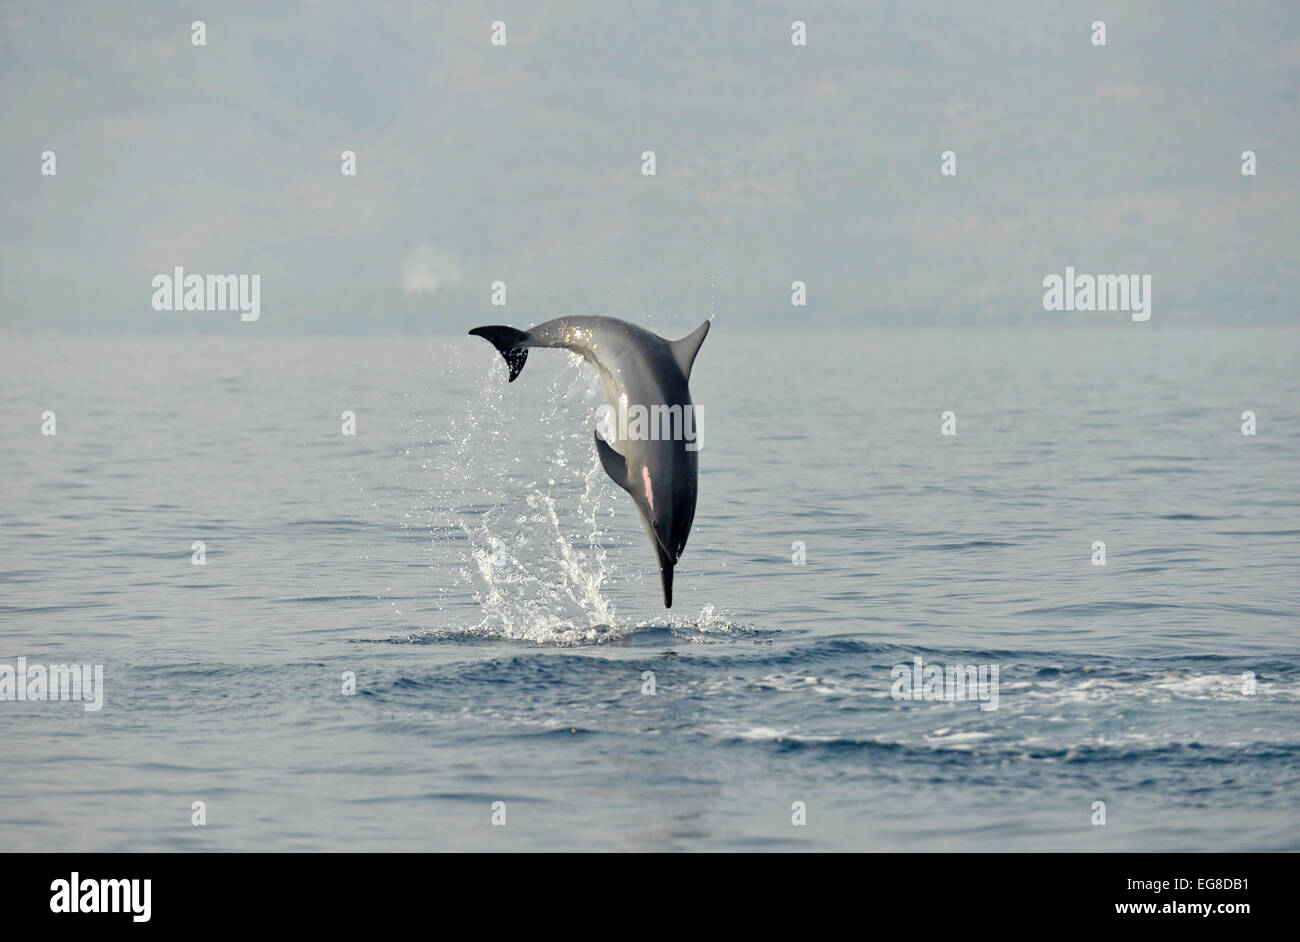 Spinner Dolphin (Stenella longirostris) leaping from the sea, Bali, Indonesia, October Stock Photo